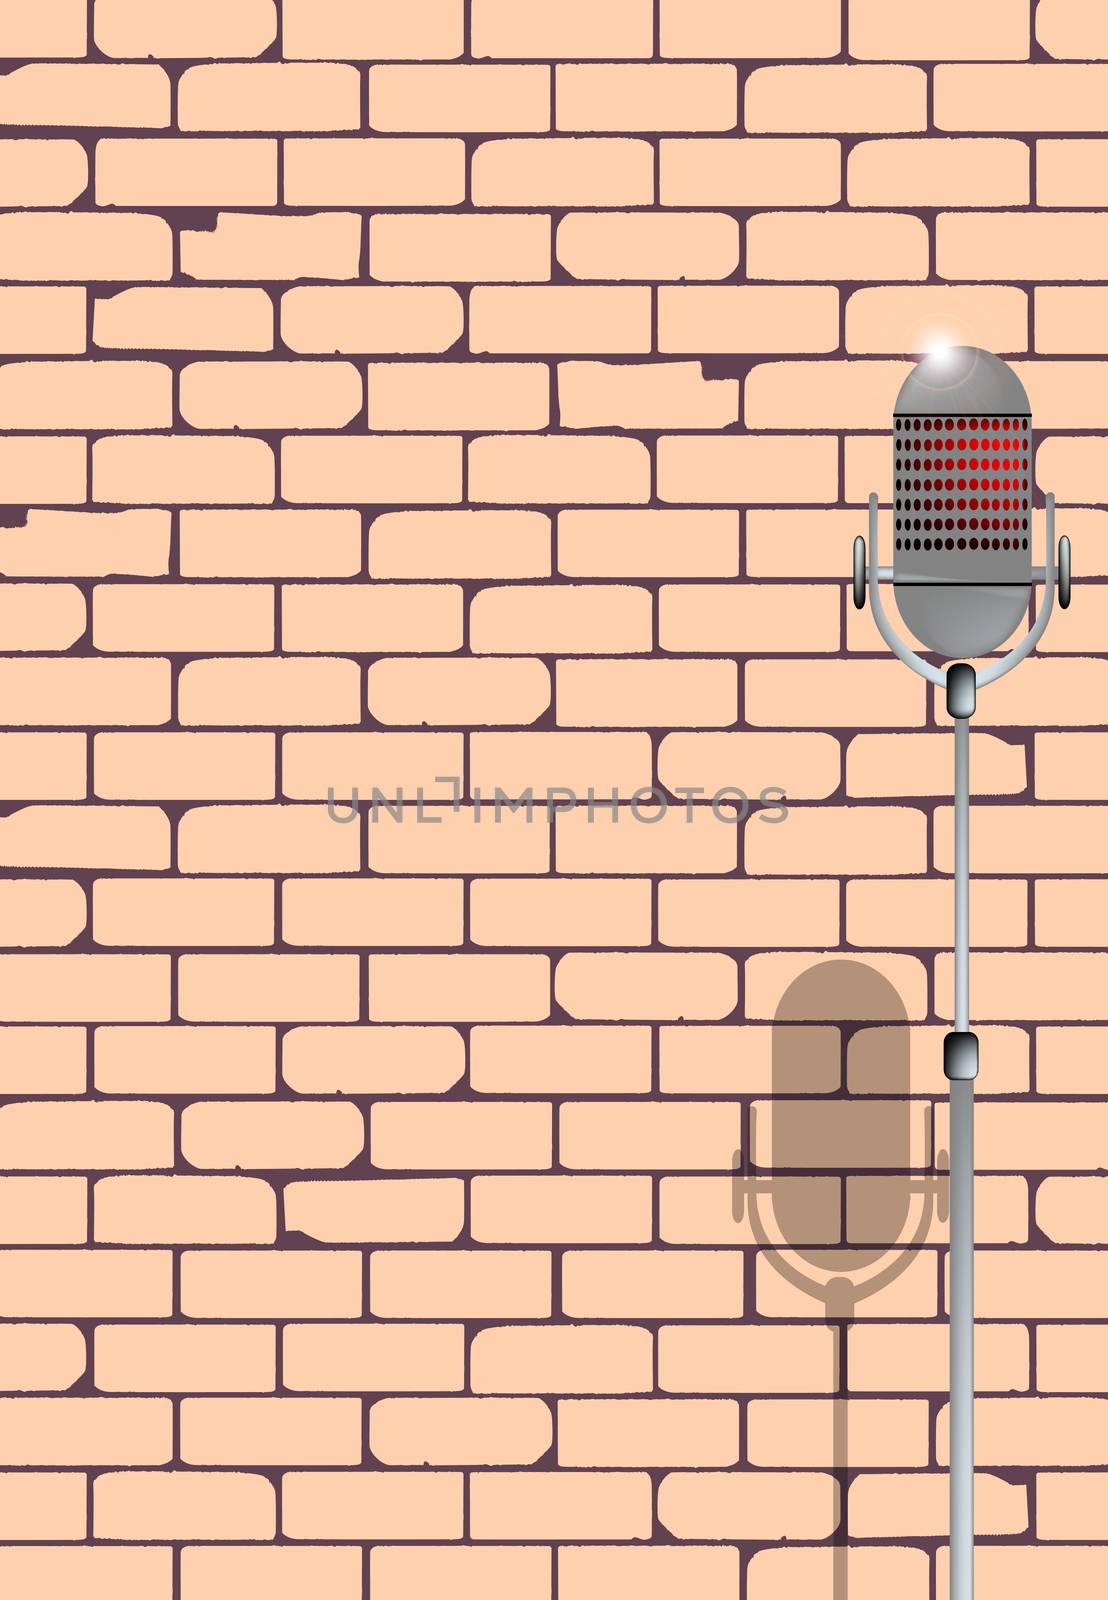 A microphone ready on stage against a brick wall ready for the Karaoke performer.